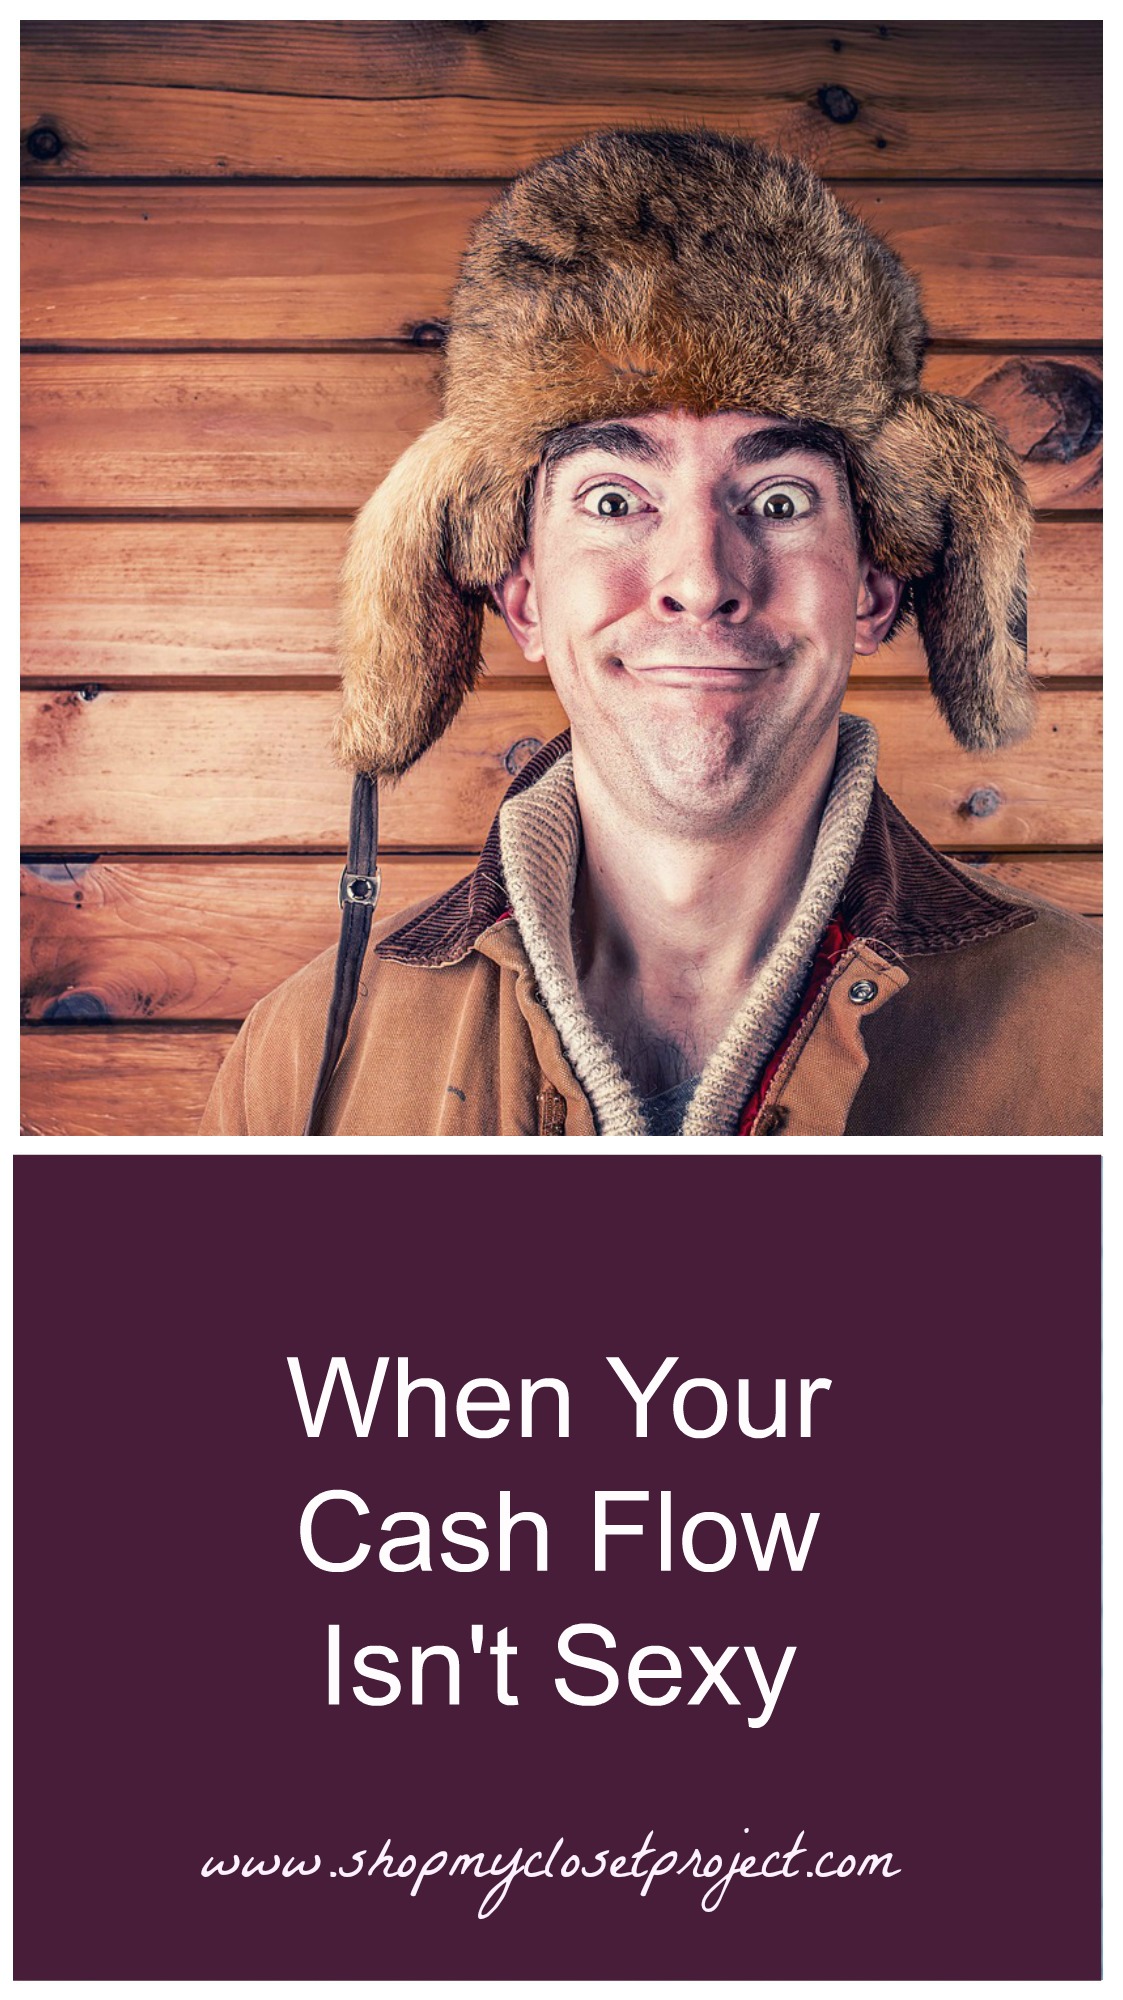 When Your Cash Flow Isn’t Sexy